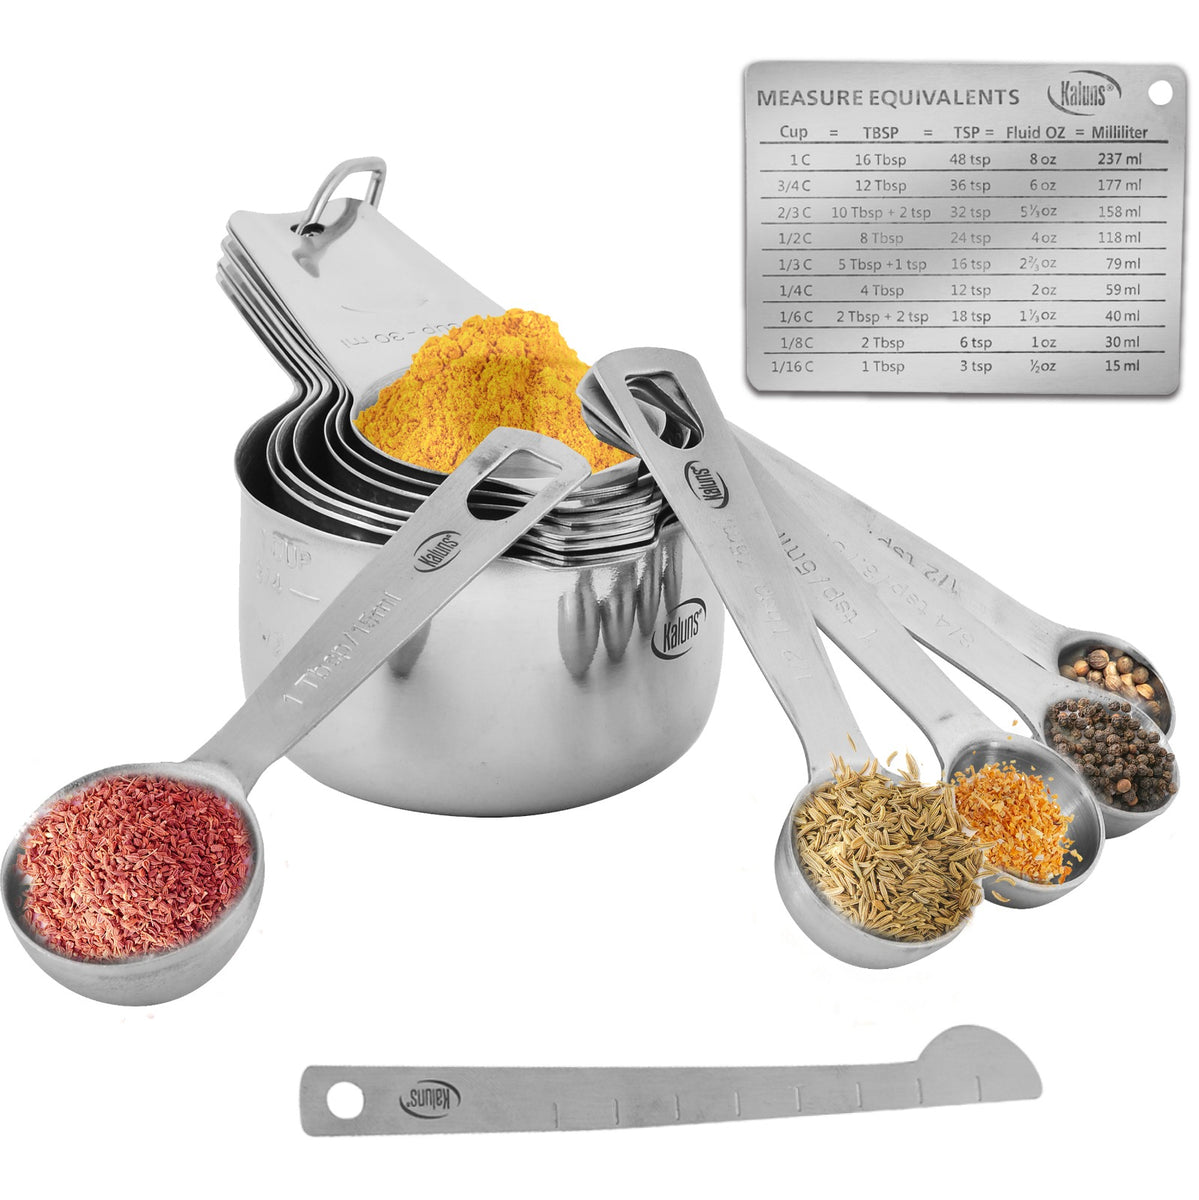 ✓Best Measuring Cups and Spoons Sets in 2023 